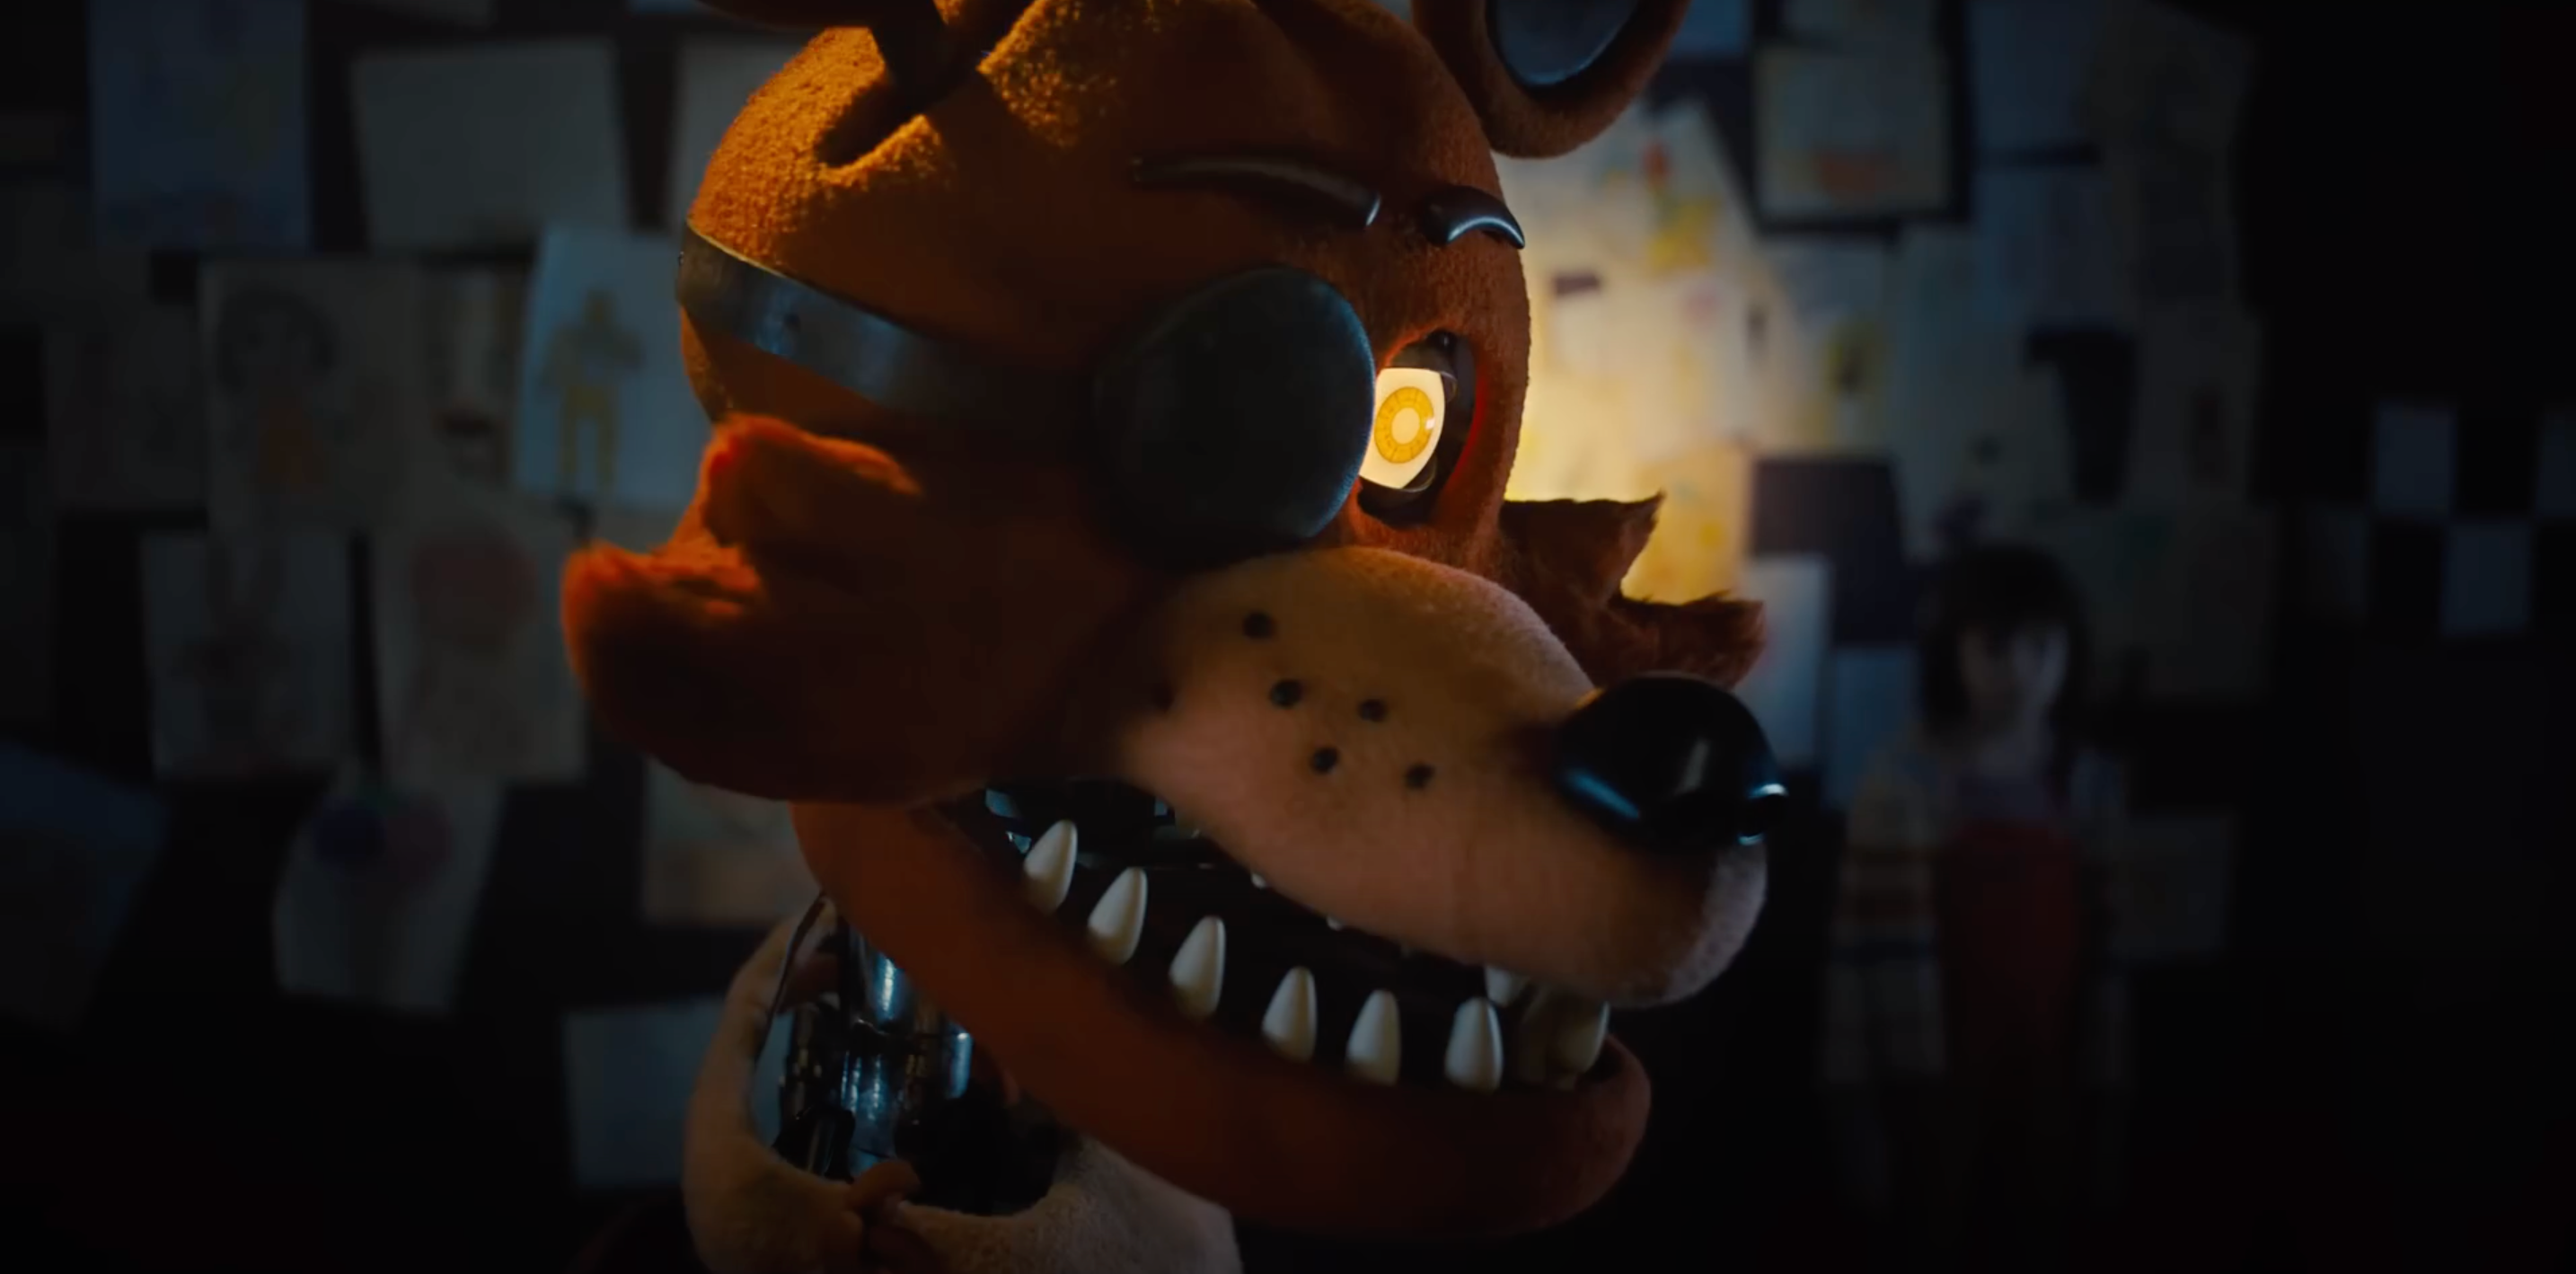 Foxy in 'Five Nights at Freddy's'